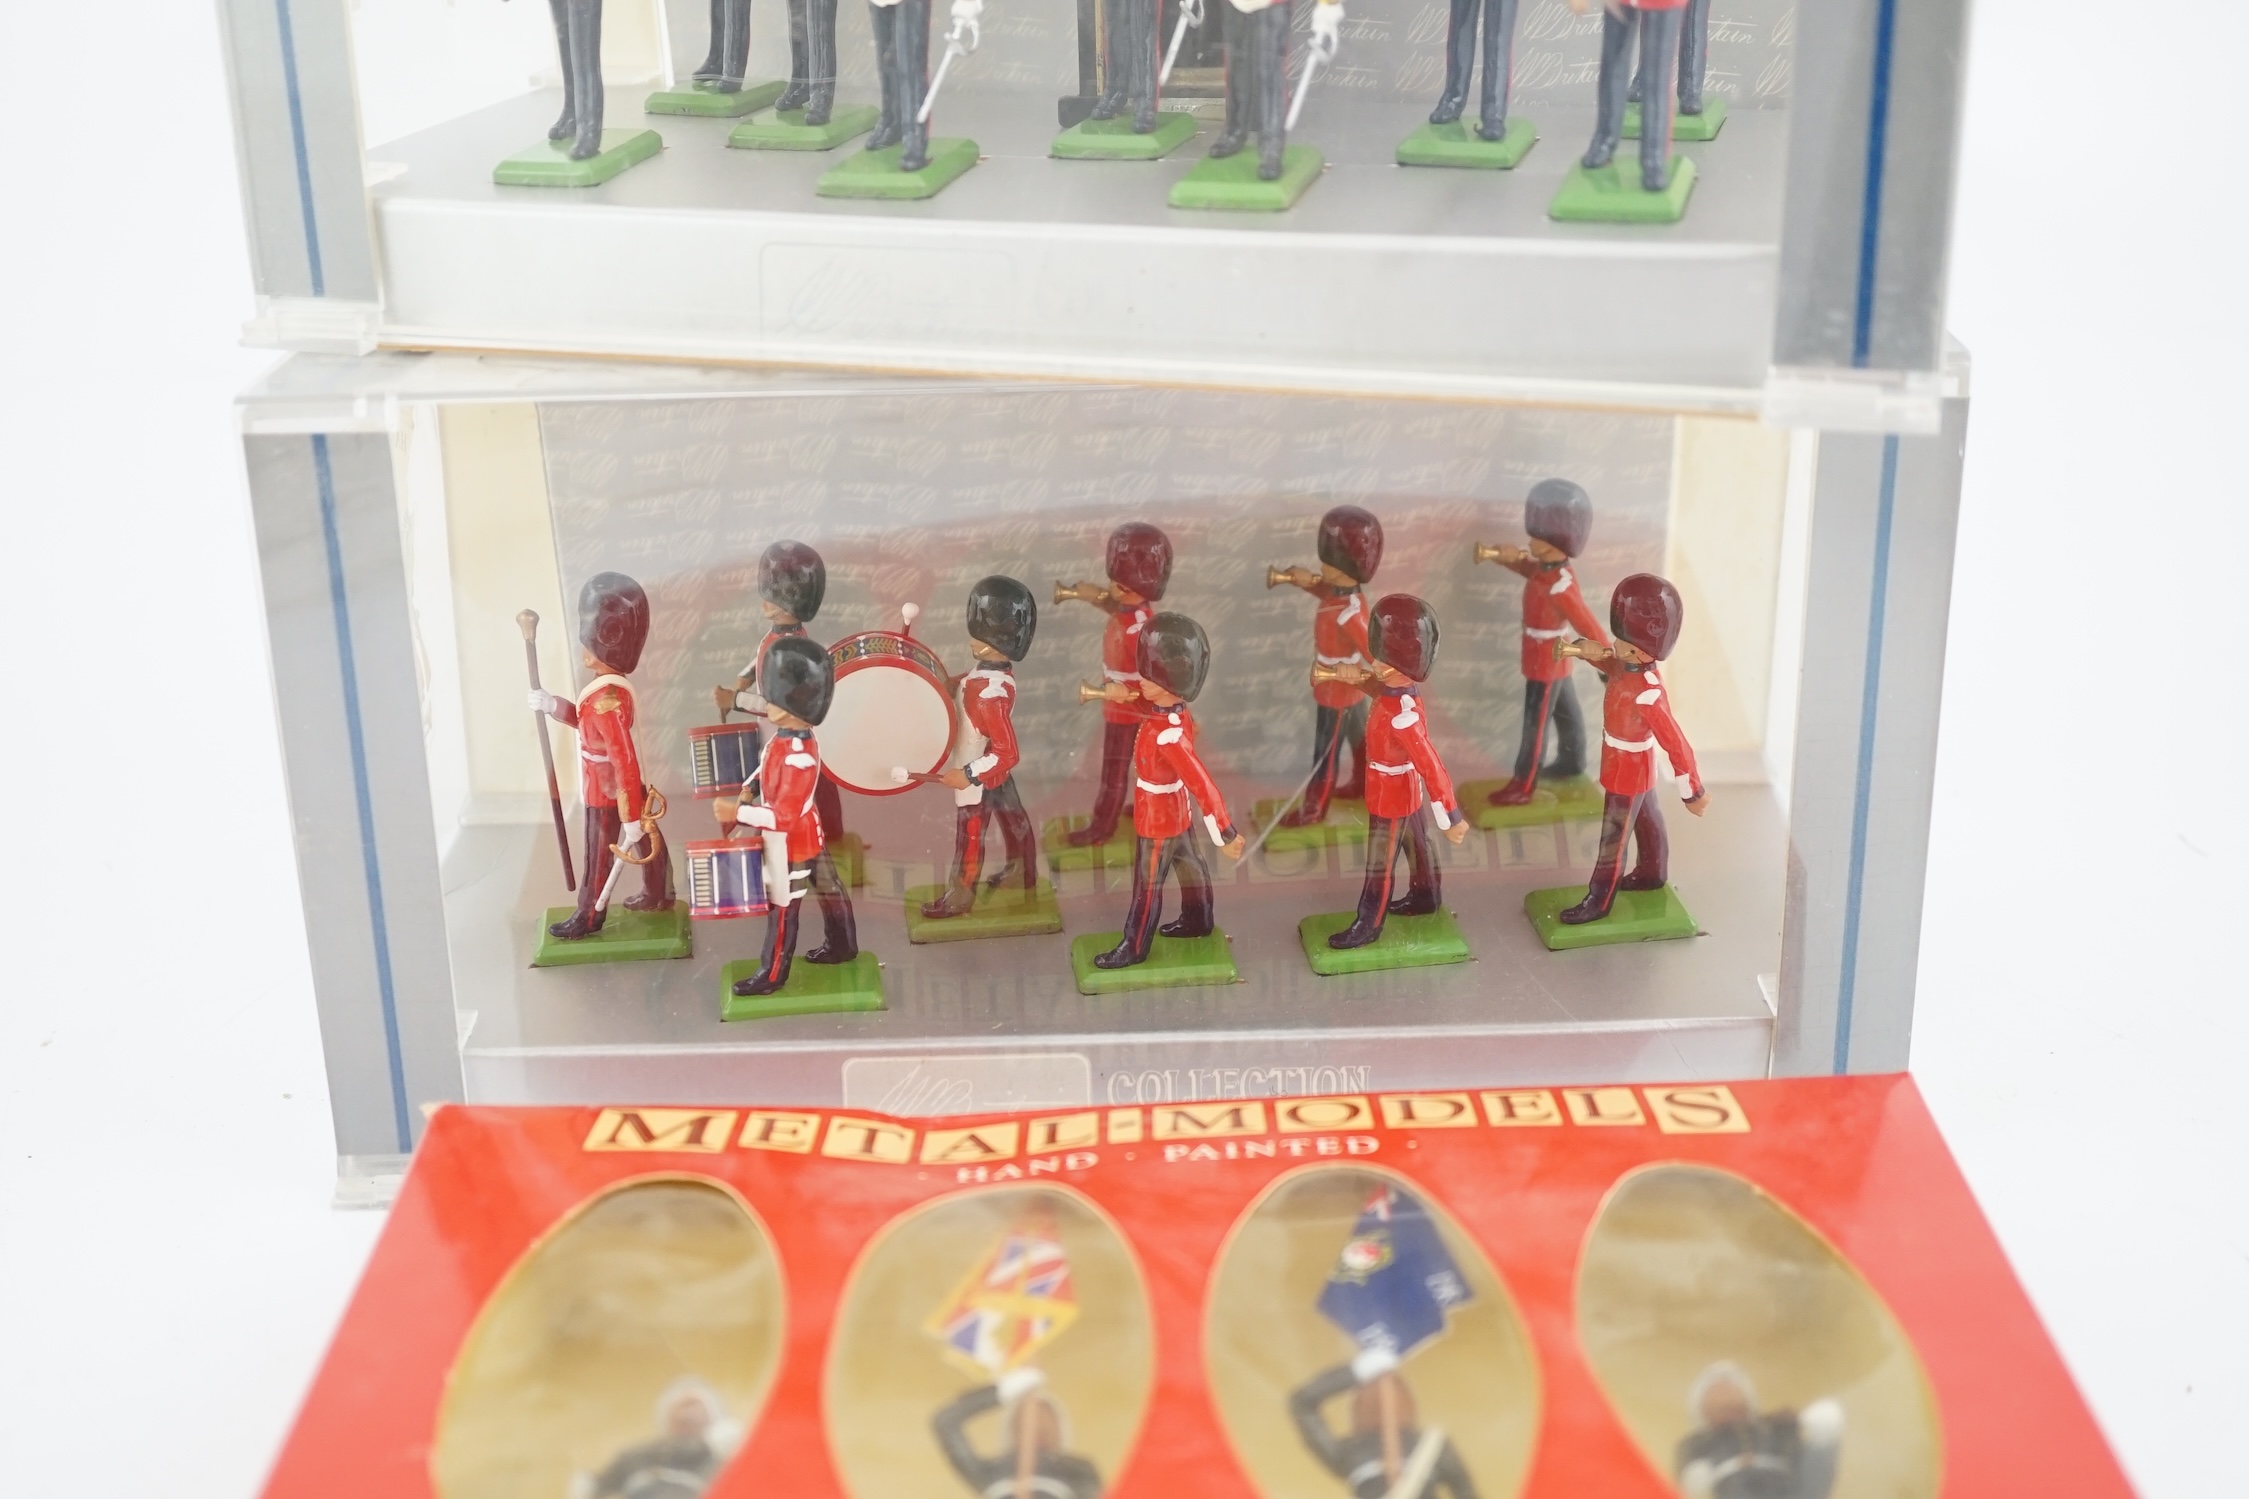 Twelve boxed 1980s and later Britains soldier sets including; two 21st Lancers (8807), U.S. Marine Corps (7303), Lifeguards (5184), Seaforth Highlanders (5185), The Irish State Coach (00254), etc.